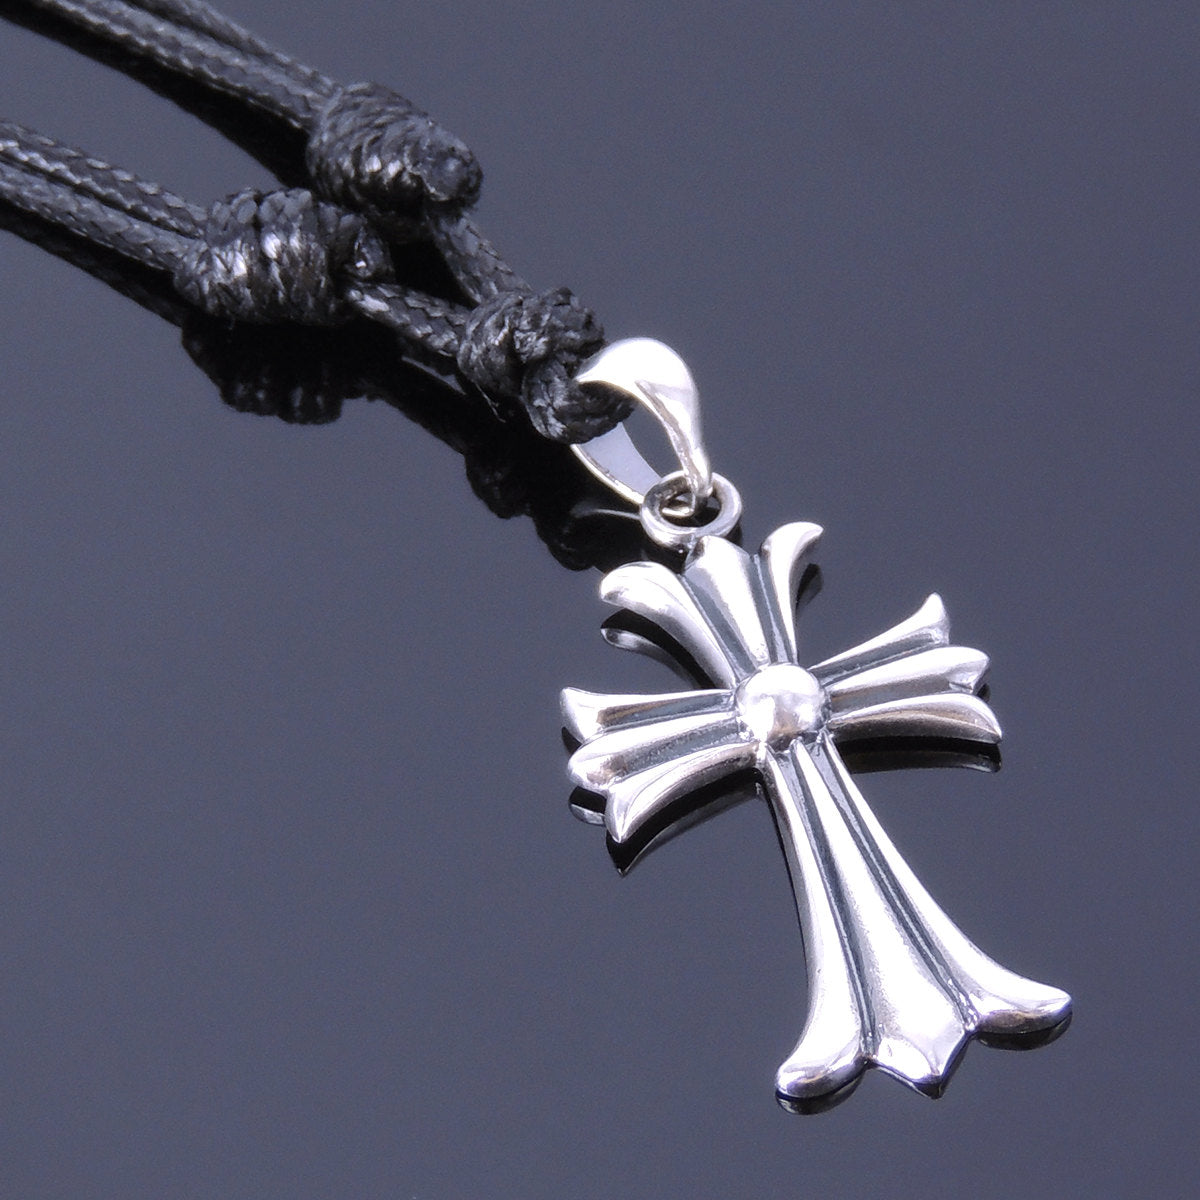 Adjustable Wax Rope Necklace with S925 Sterling Silver Protective Holy Cross Pendant - Handmade by Gem & Silver NK014